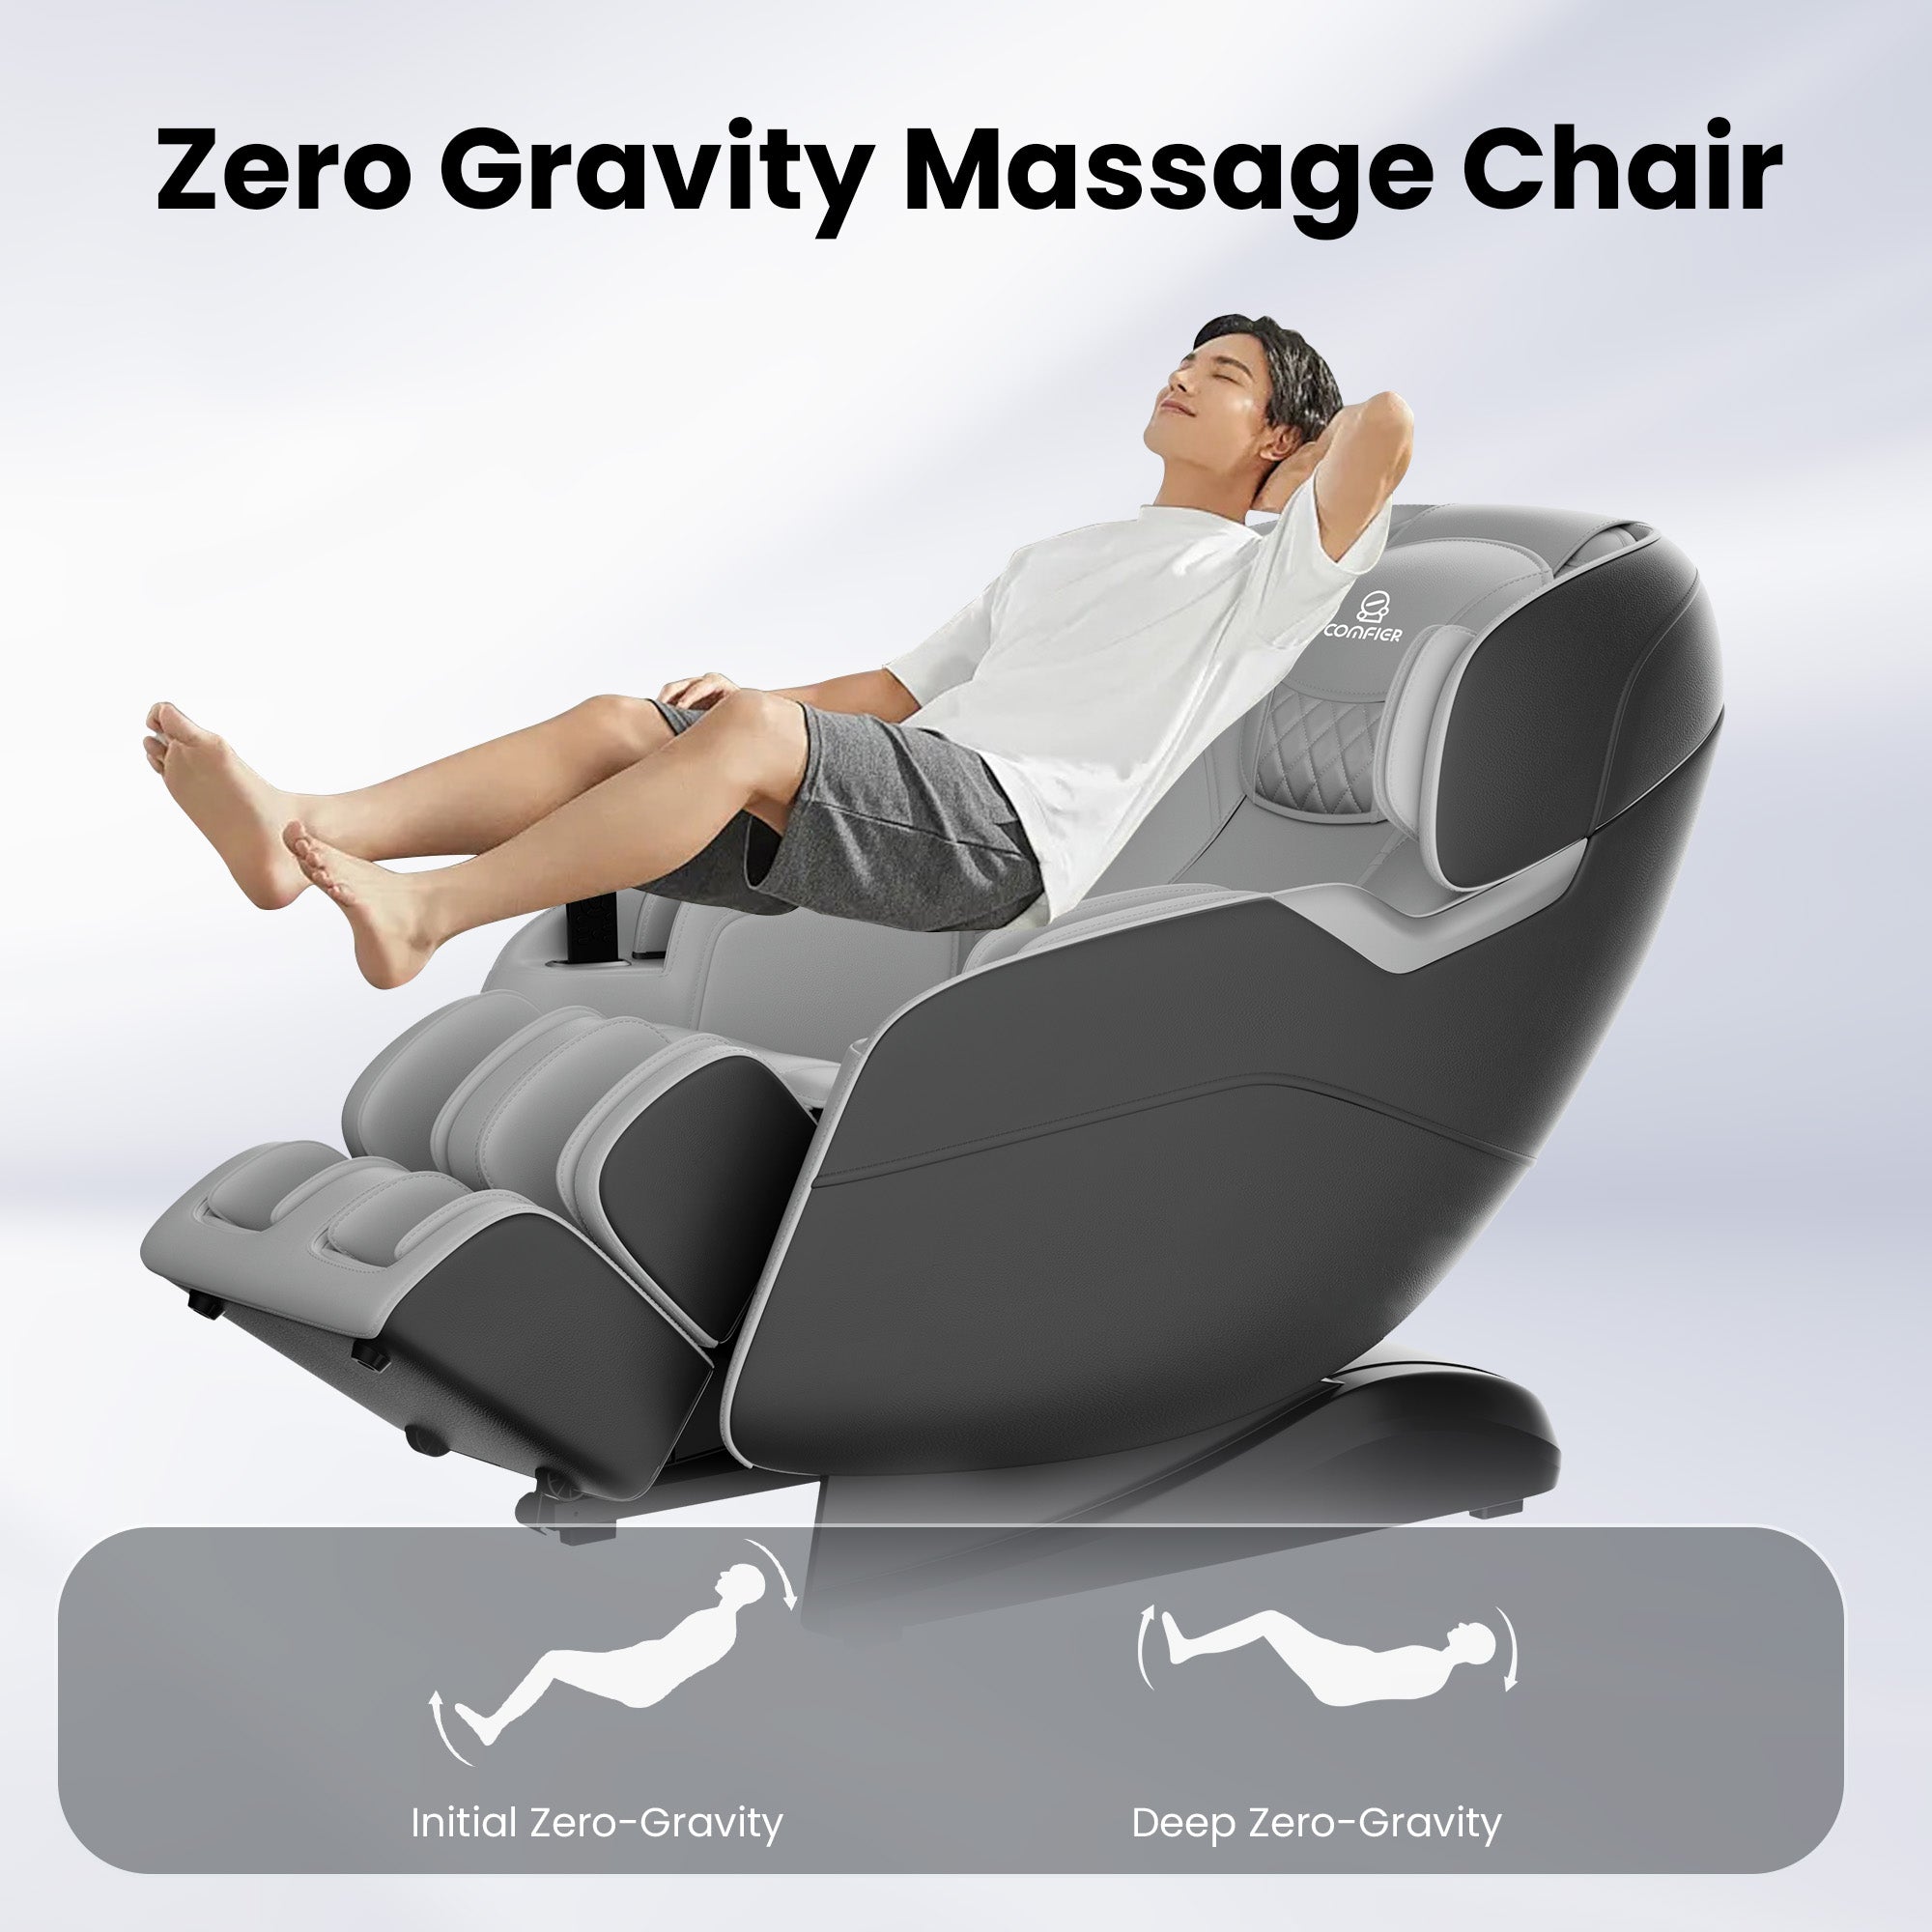 COMFIER Zero Gravity Massage Chair, SL Track Shiatsu Massage Chair Recliner, Body Scan Massage Chair Full Body with 30 Airbags Foot Massage Stretch Massage Heating Bluetooth-CF-9317